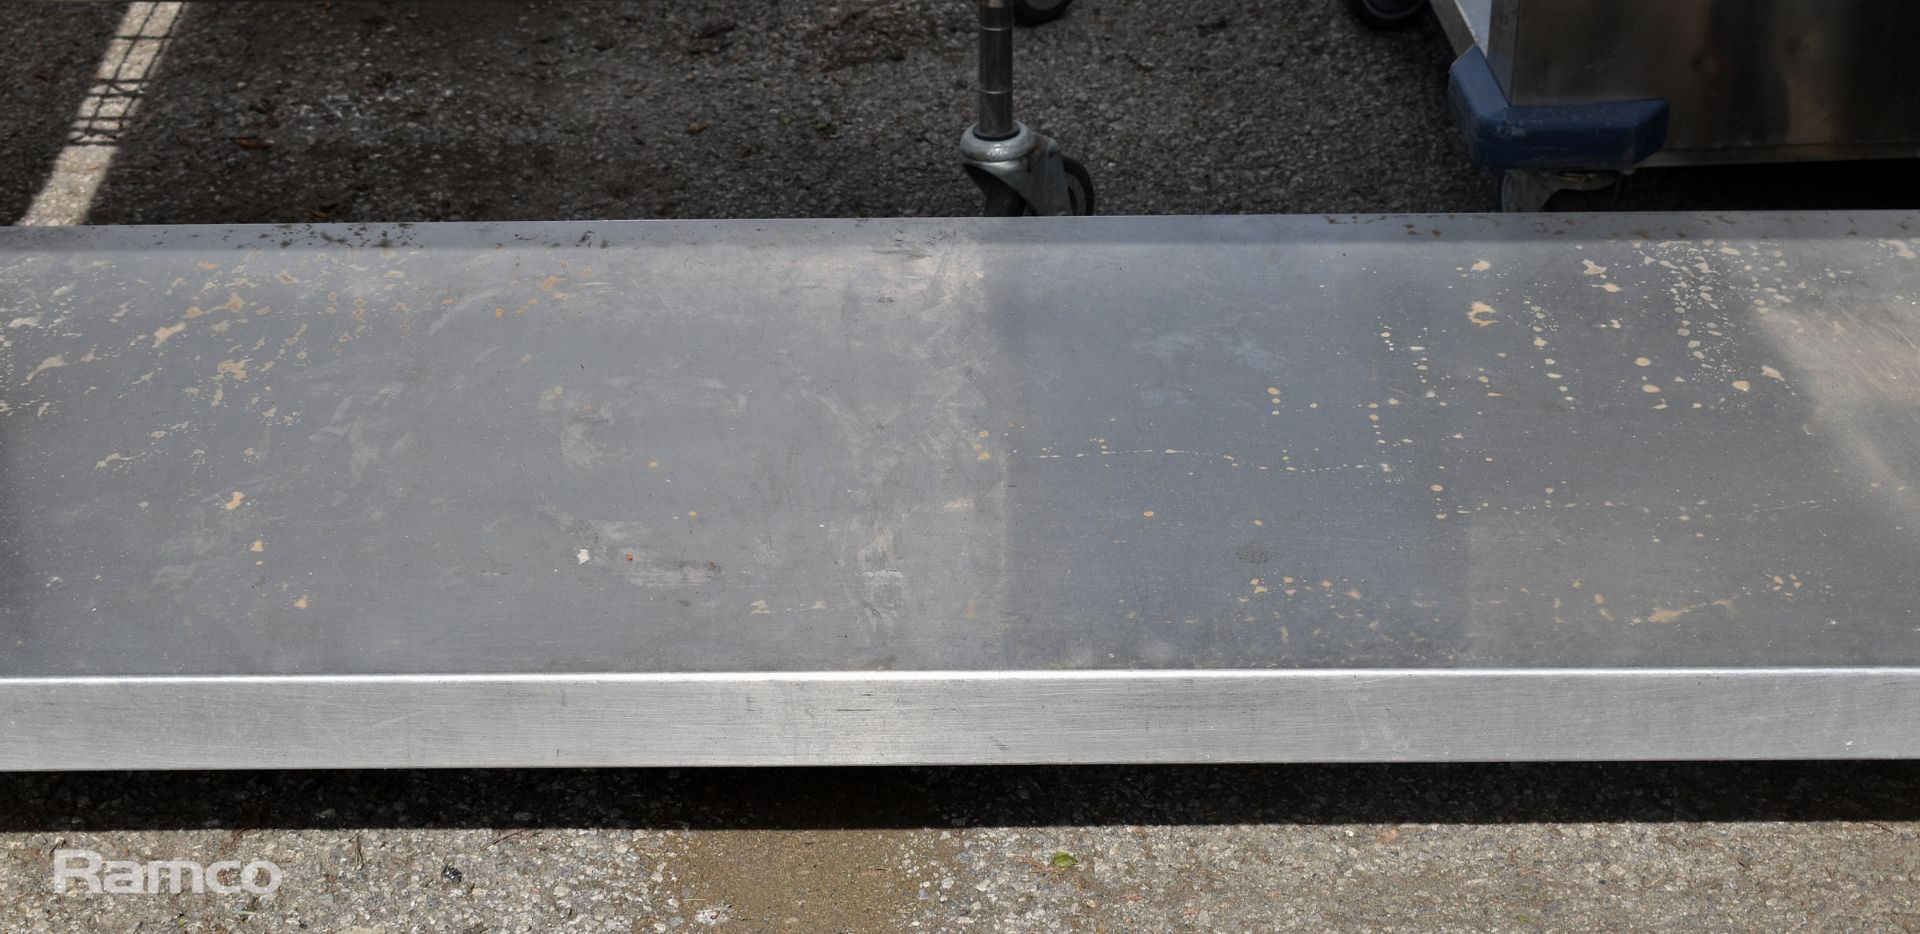 Stainless steel mobile workbench / table with bottom shelf- W 1500 x D 700 x H 835mm - Image 6 of 6